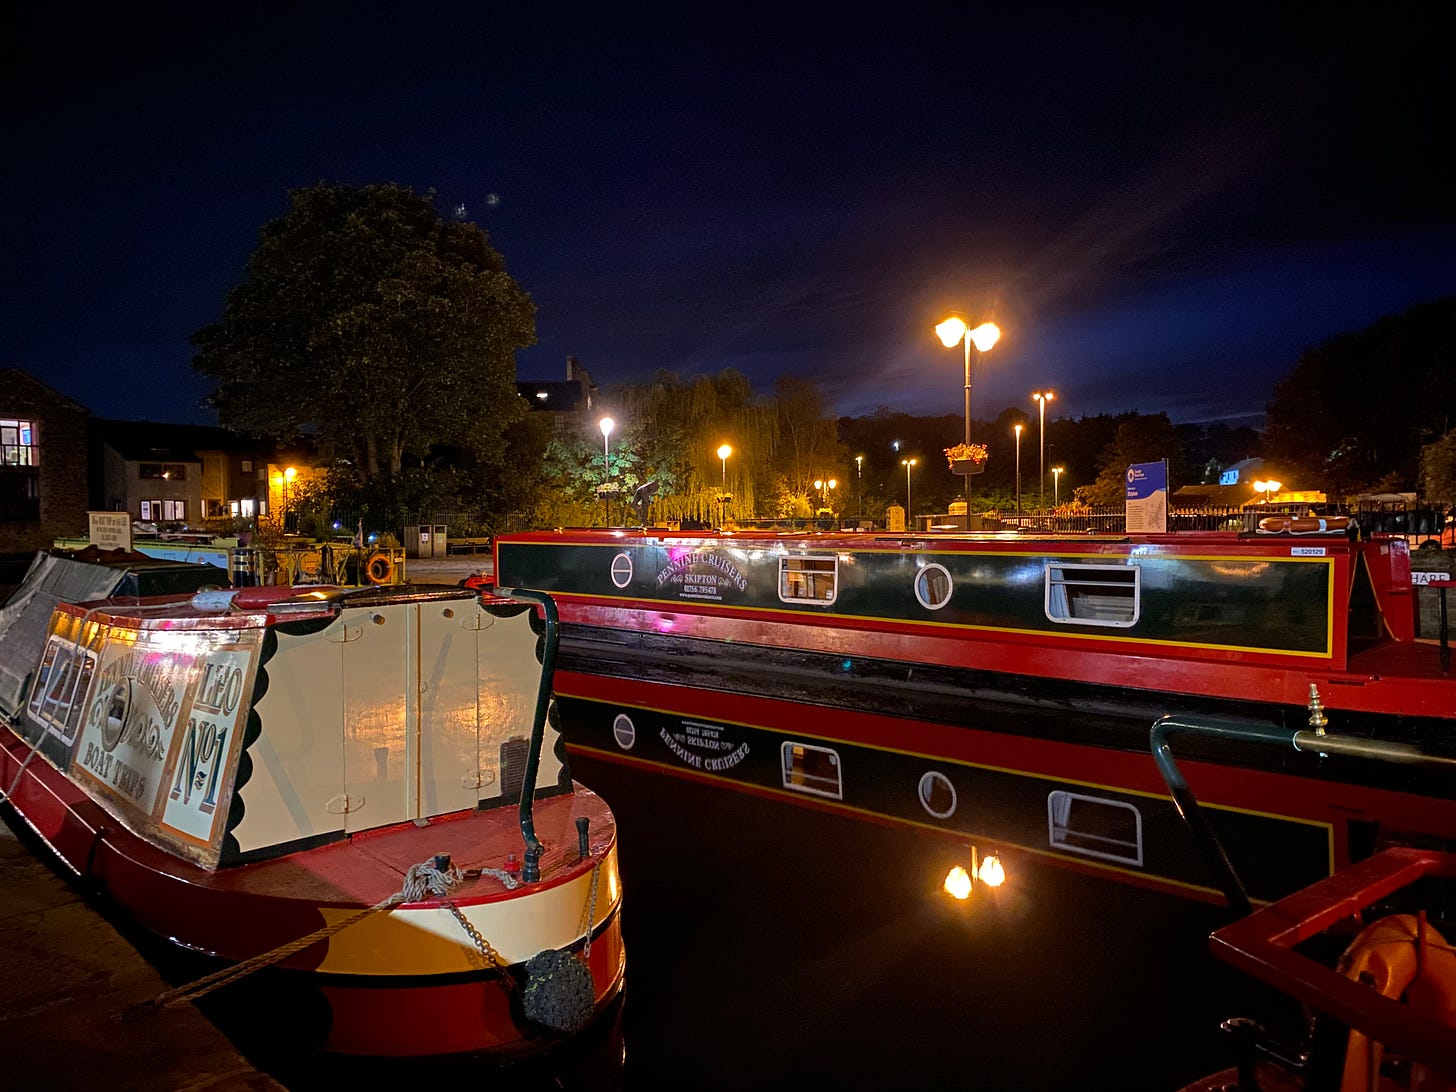 Canal boats on a canal at night